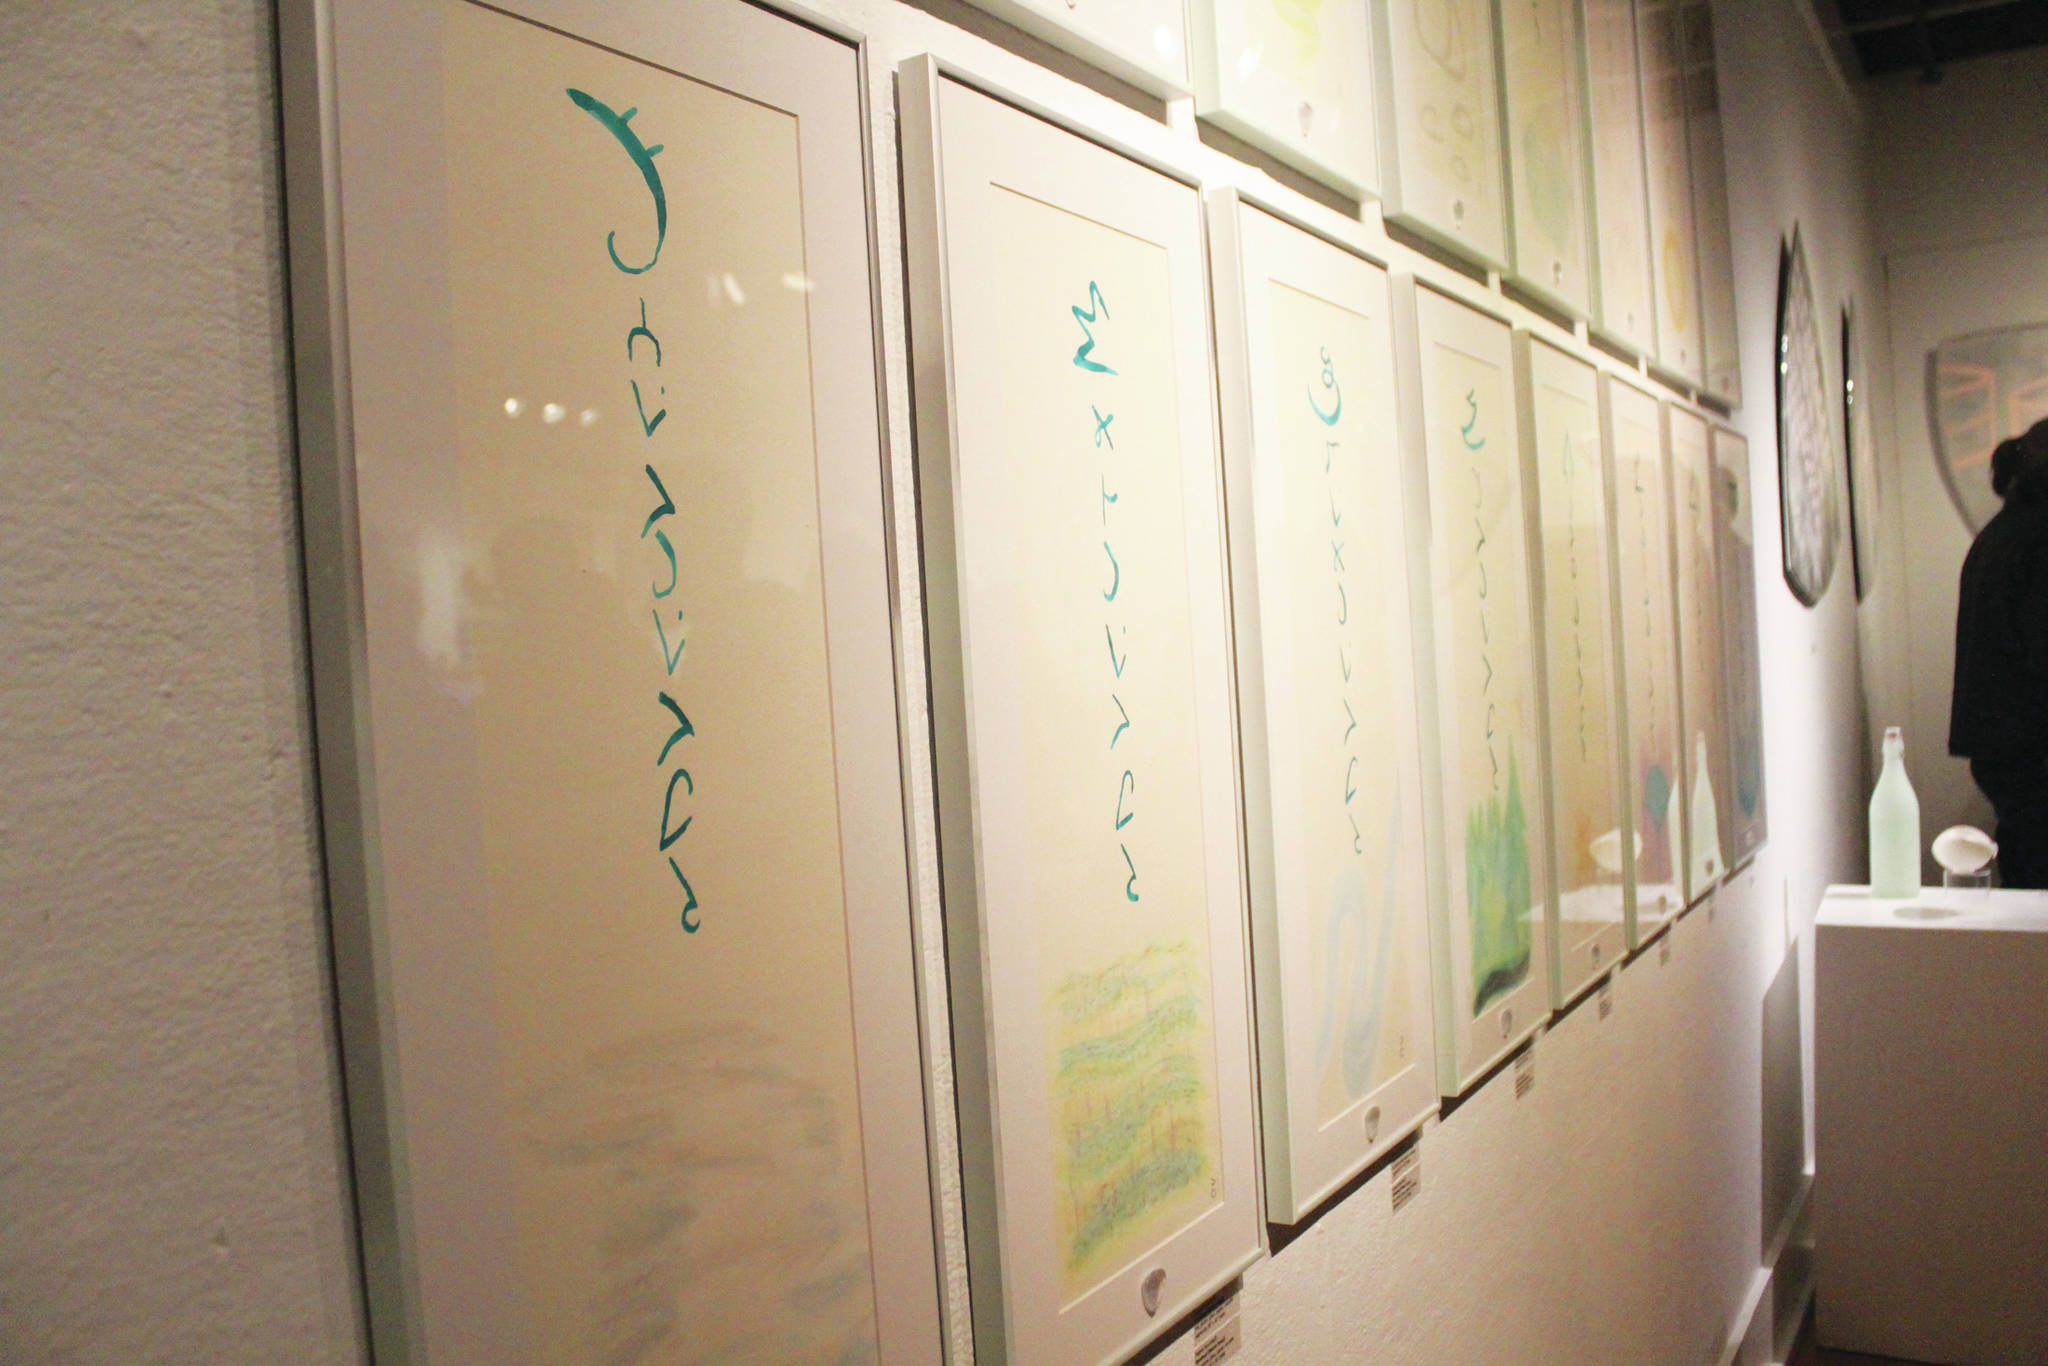 Paintings called Dnayi scrolls hang on a wall at the Bunnell Street Arts Center during an art exhibit opening Friday, Dec. 6, 2019 featuring the work of Argent Kvasnikoff in Homer, Alaska. The scrolls are calligraphic paintings depicting natural phenomena, like water or mountains. (Photo by Megan Pacer/Homer News)